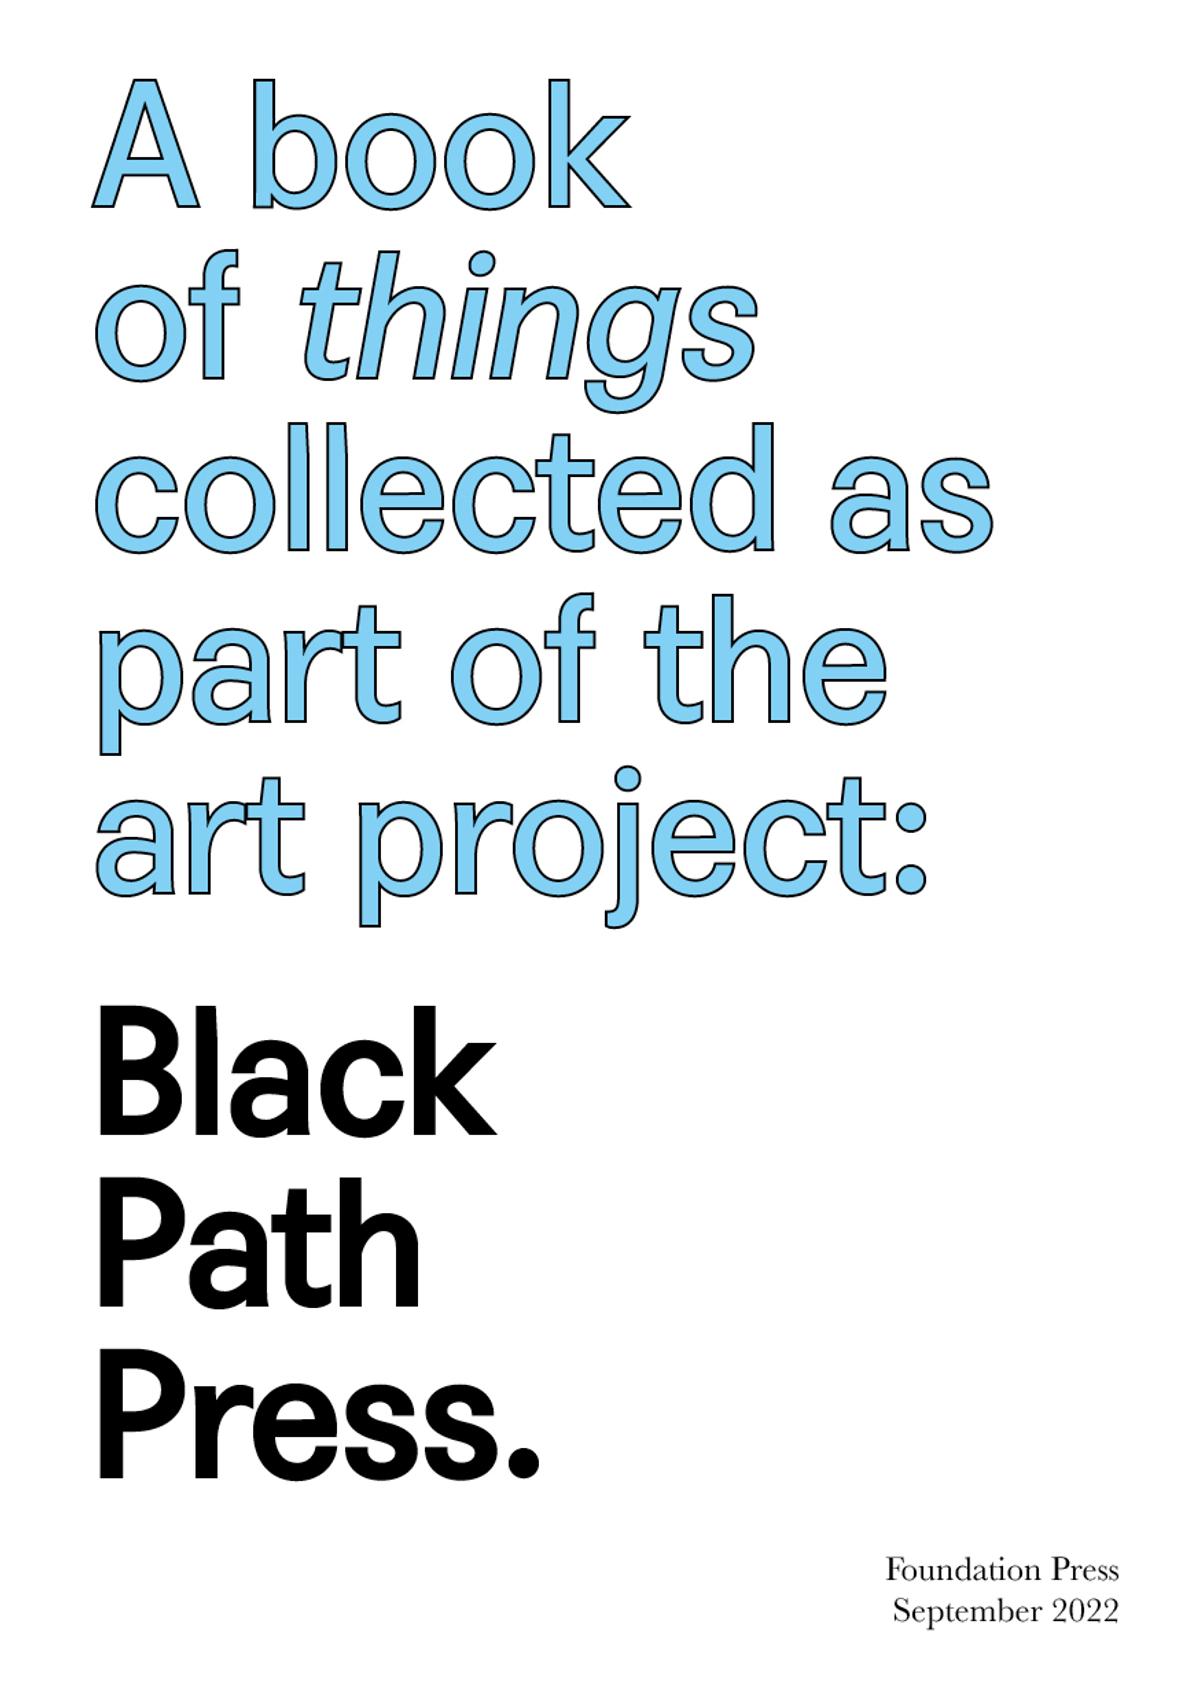 A book of things collected as part of the art project: Black Path Press